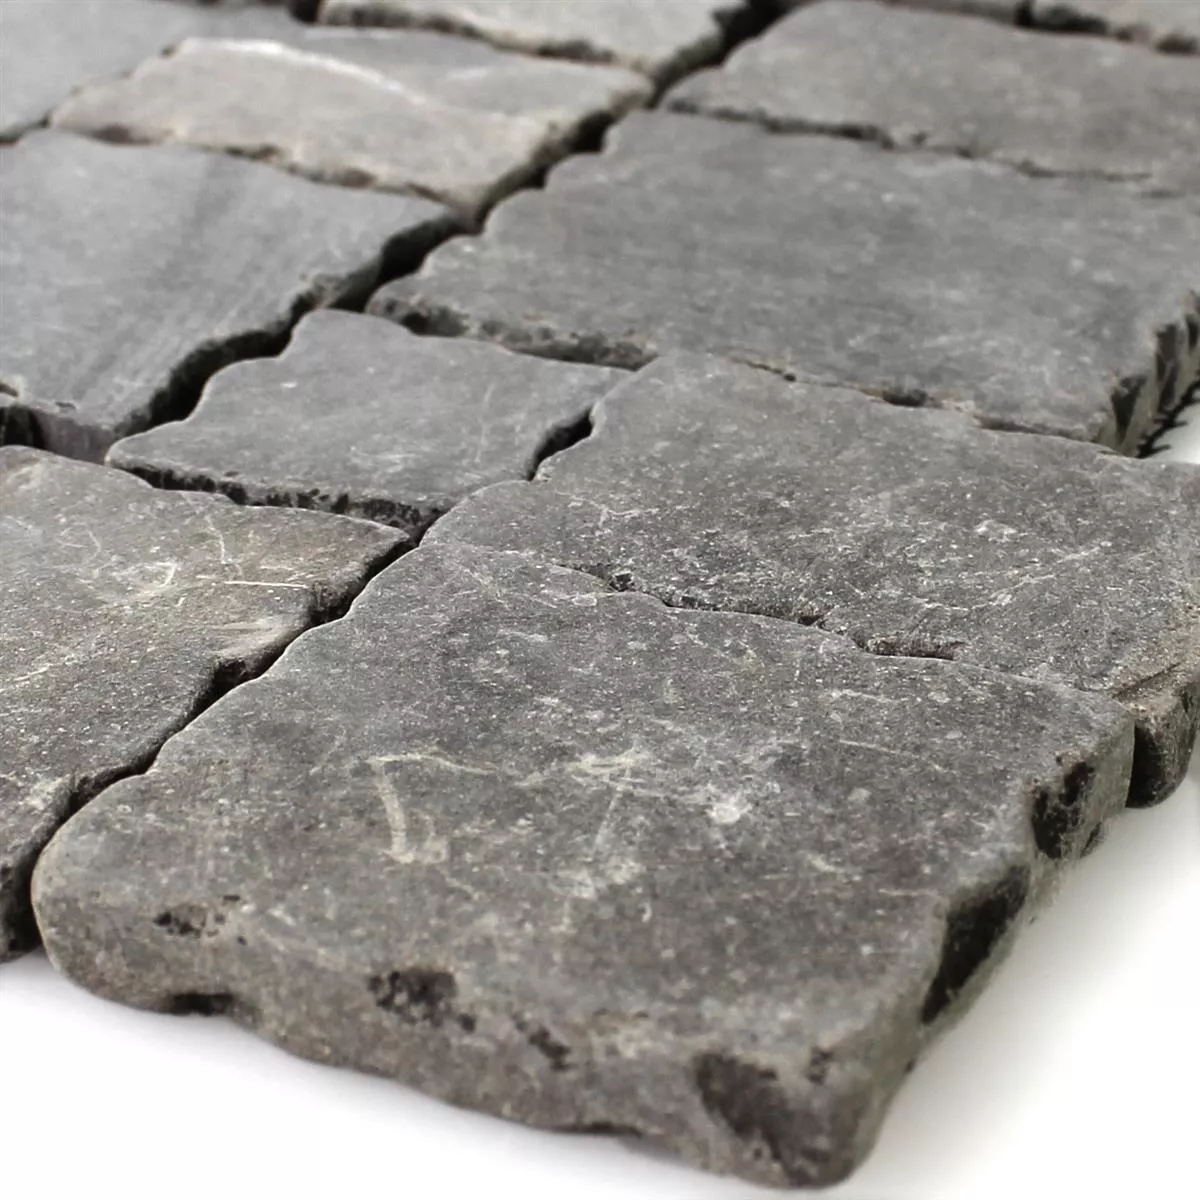 Mosaic Tiles Natural Stone Anthracite Drummed